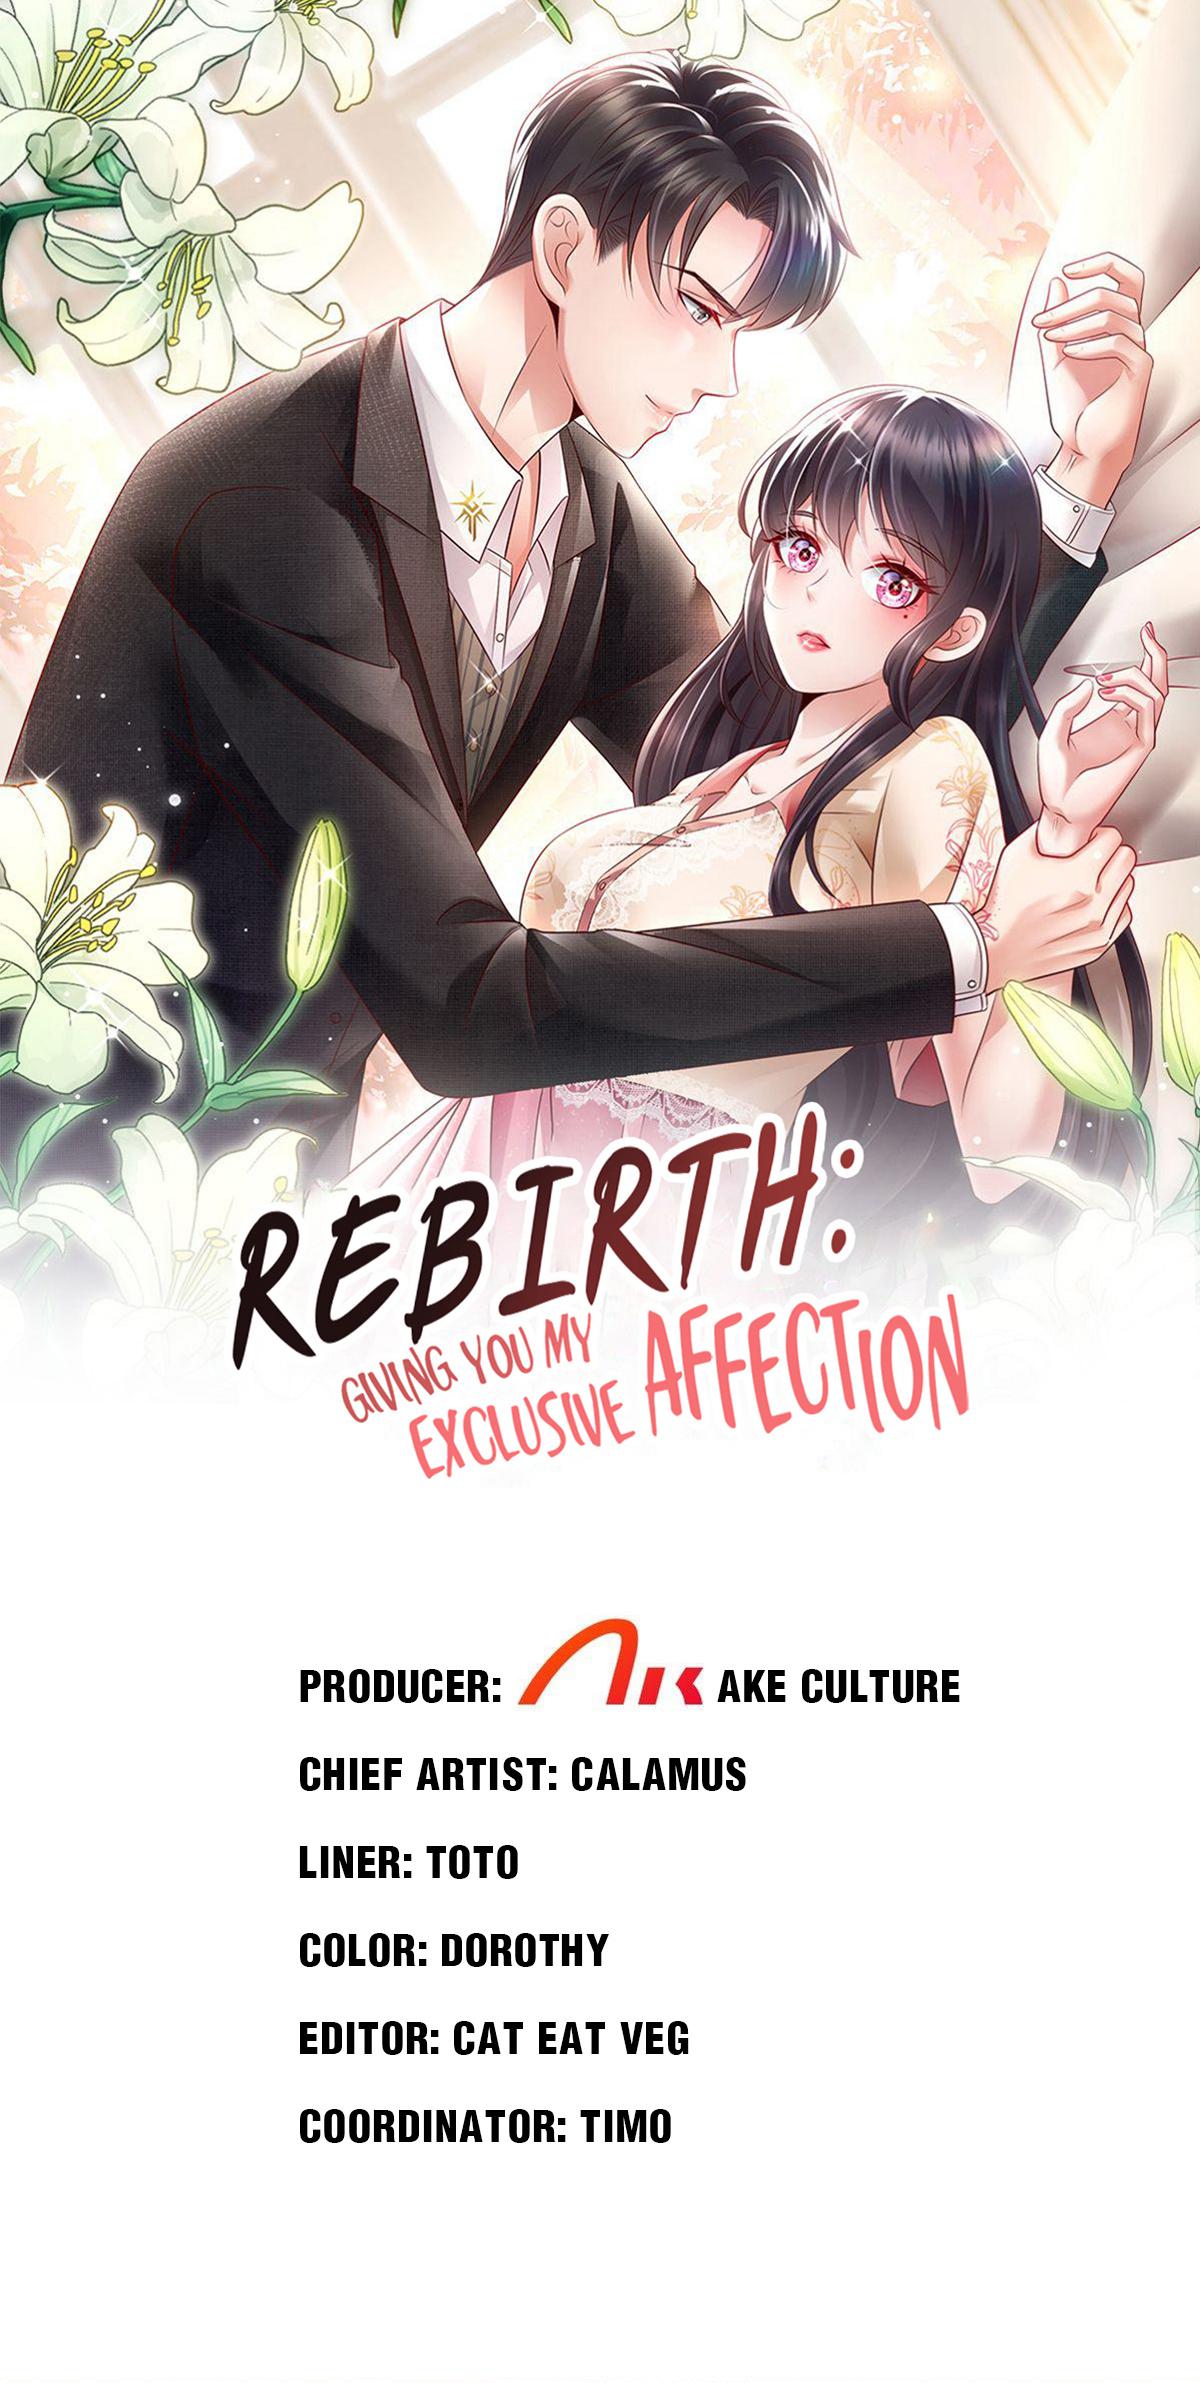 Rebirth: Giving You My Exclusive Affection 195